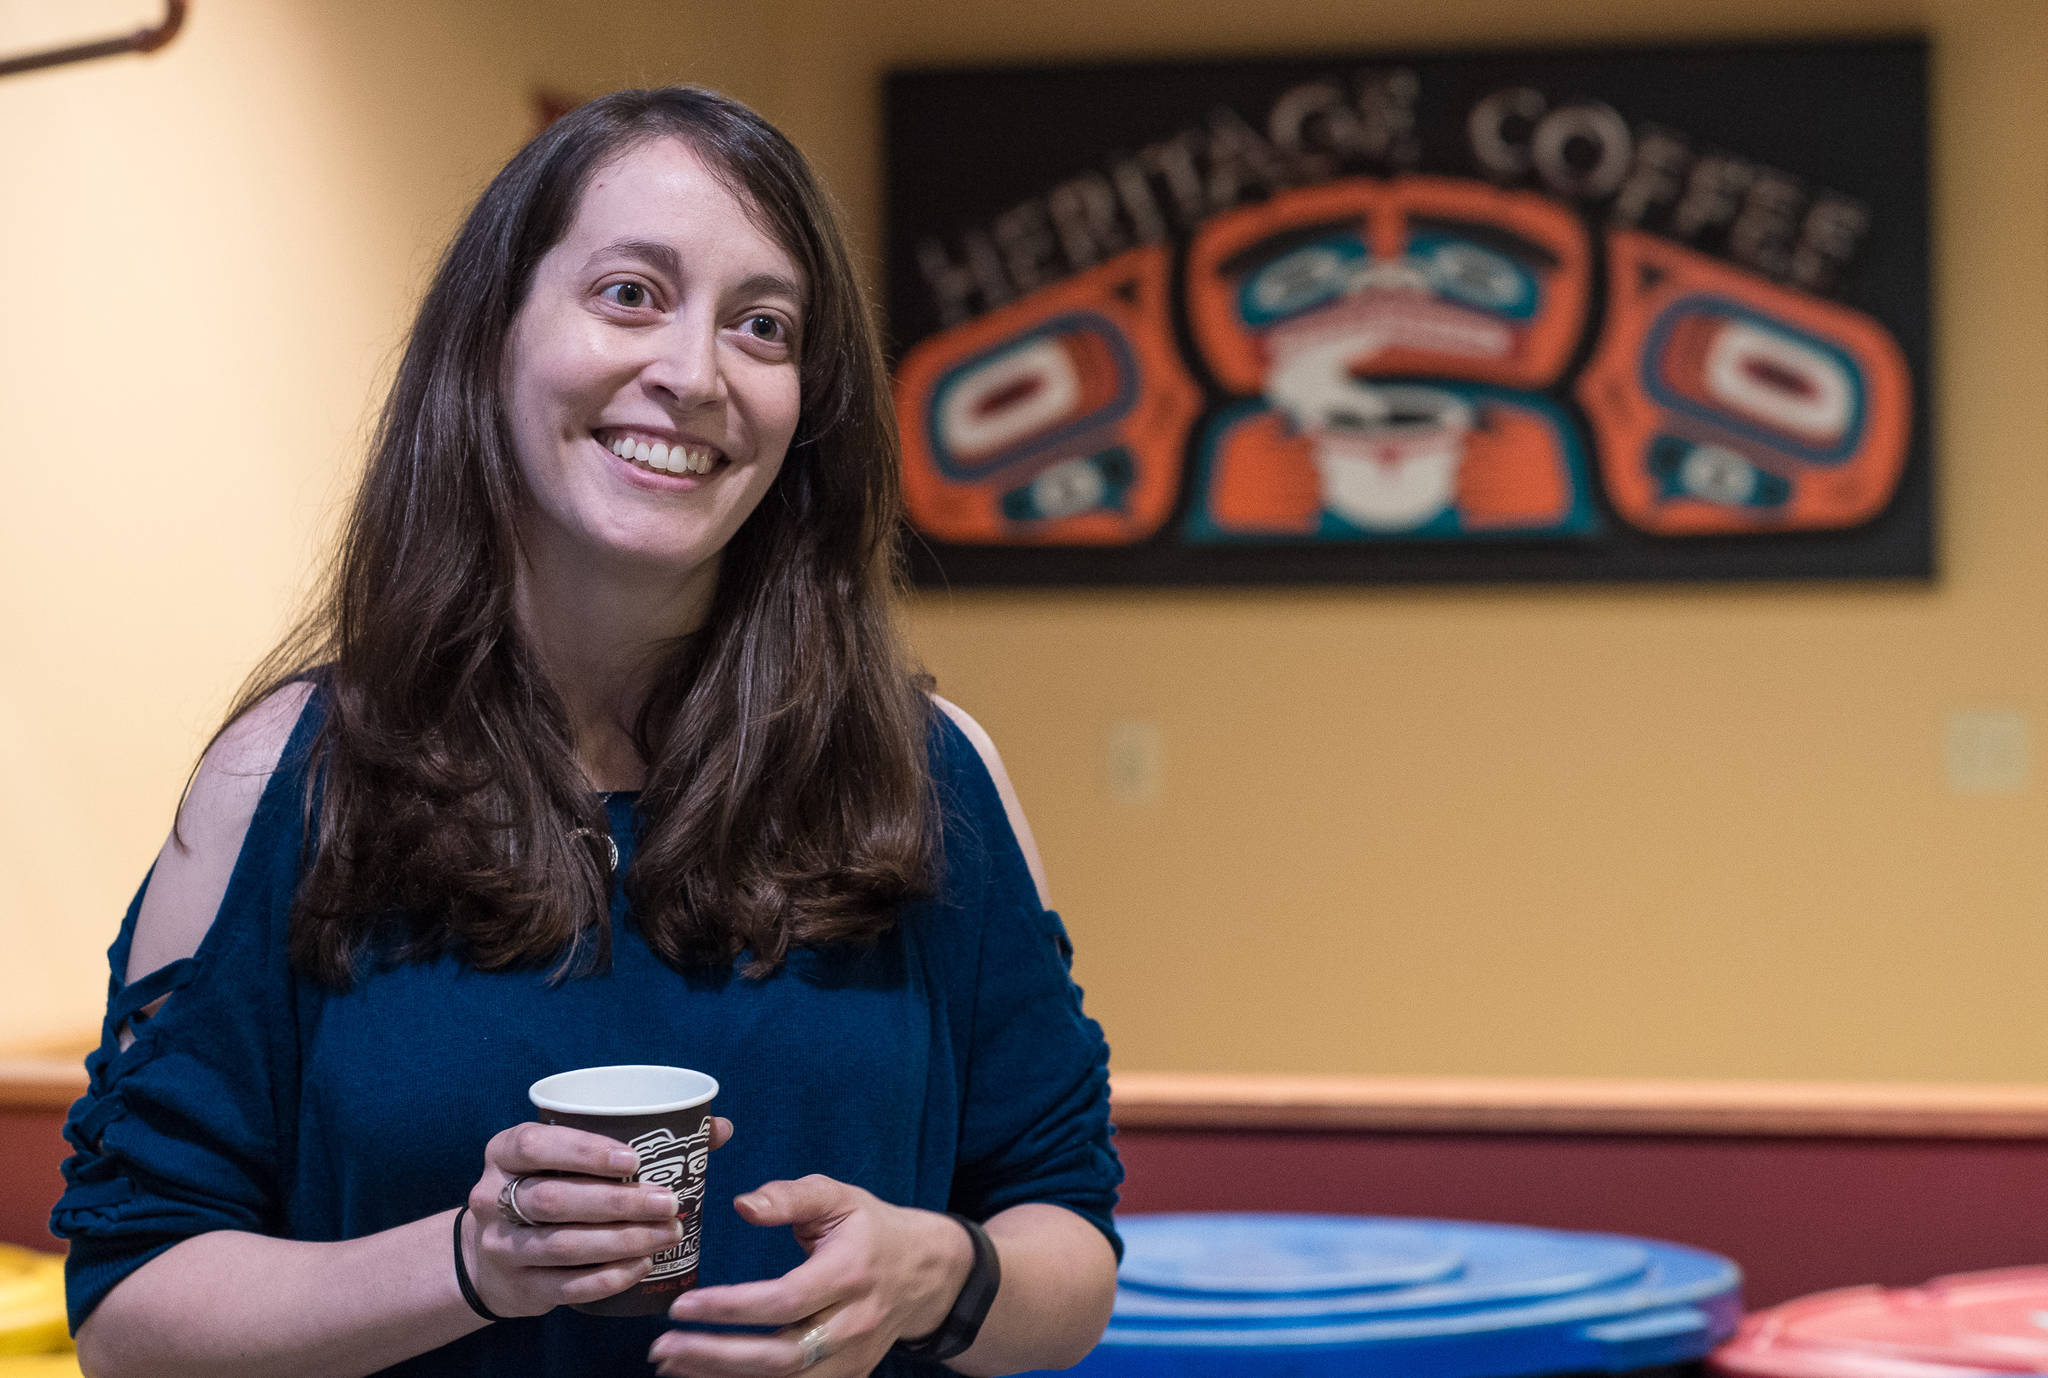 Amy Knight talks about her new ownership of Heritage Coffee at their downtown office and roasting facility on Thursday, Aug. 31, 2017. (Michael Penn | Juneau Empire)